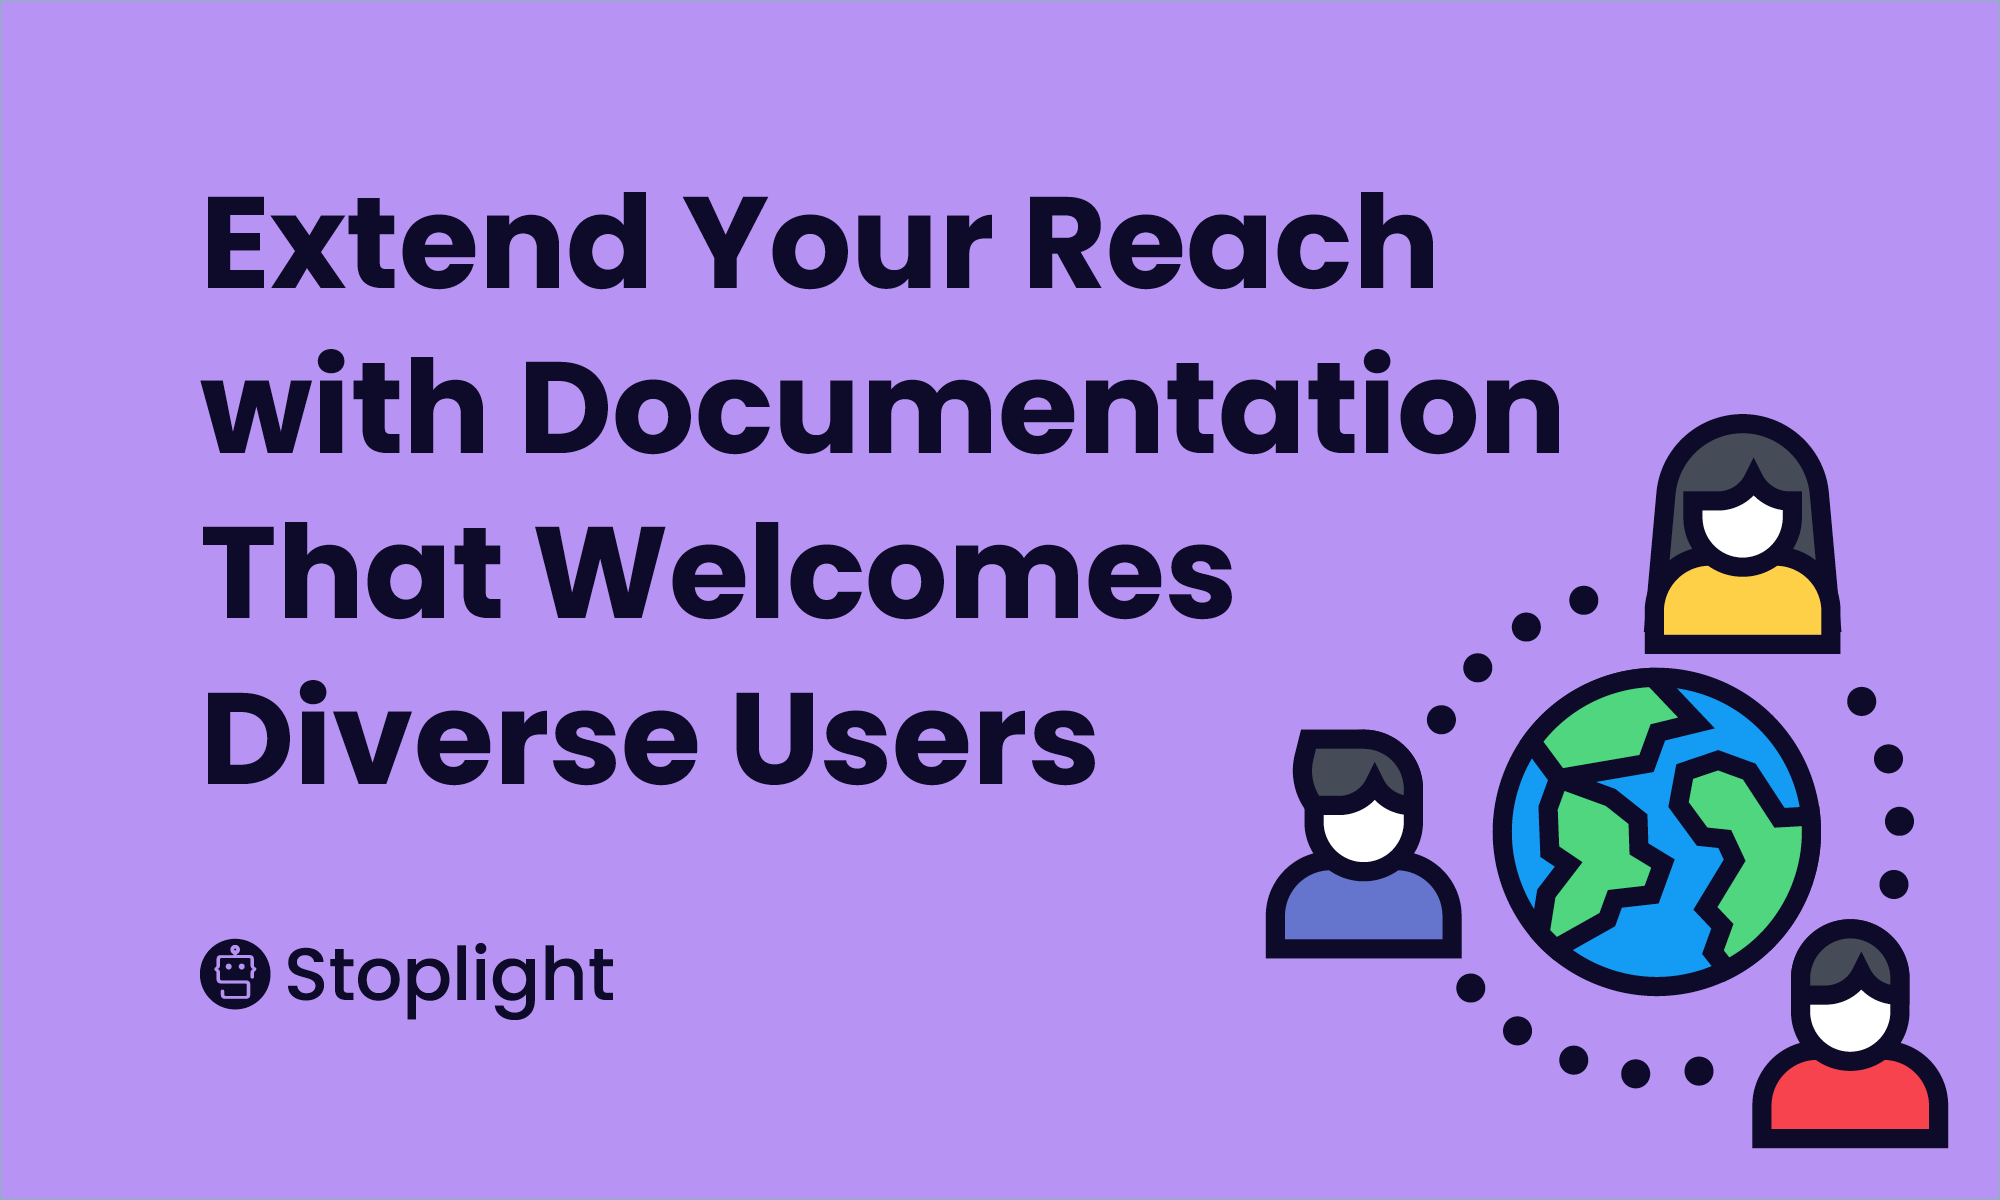 Extend Your Reach with Documentation that Welcomes Diverse Users